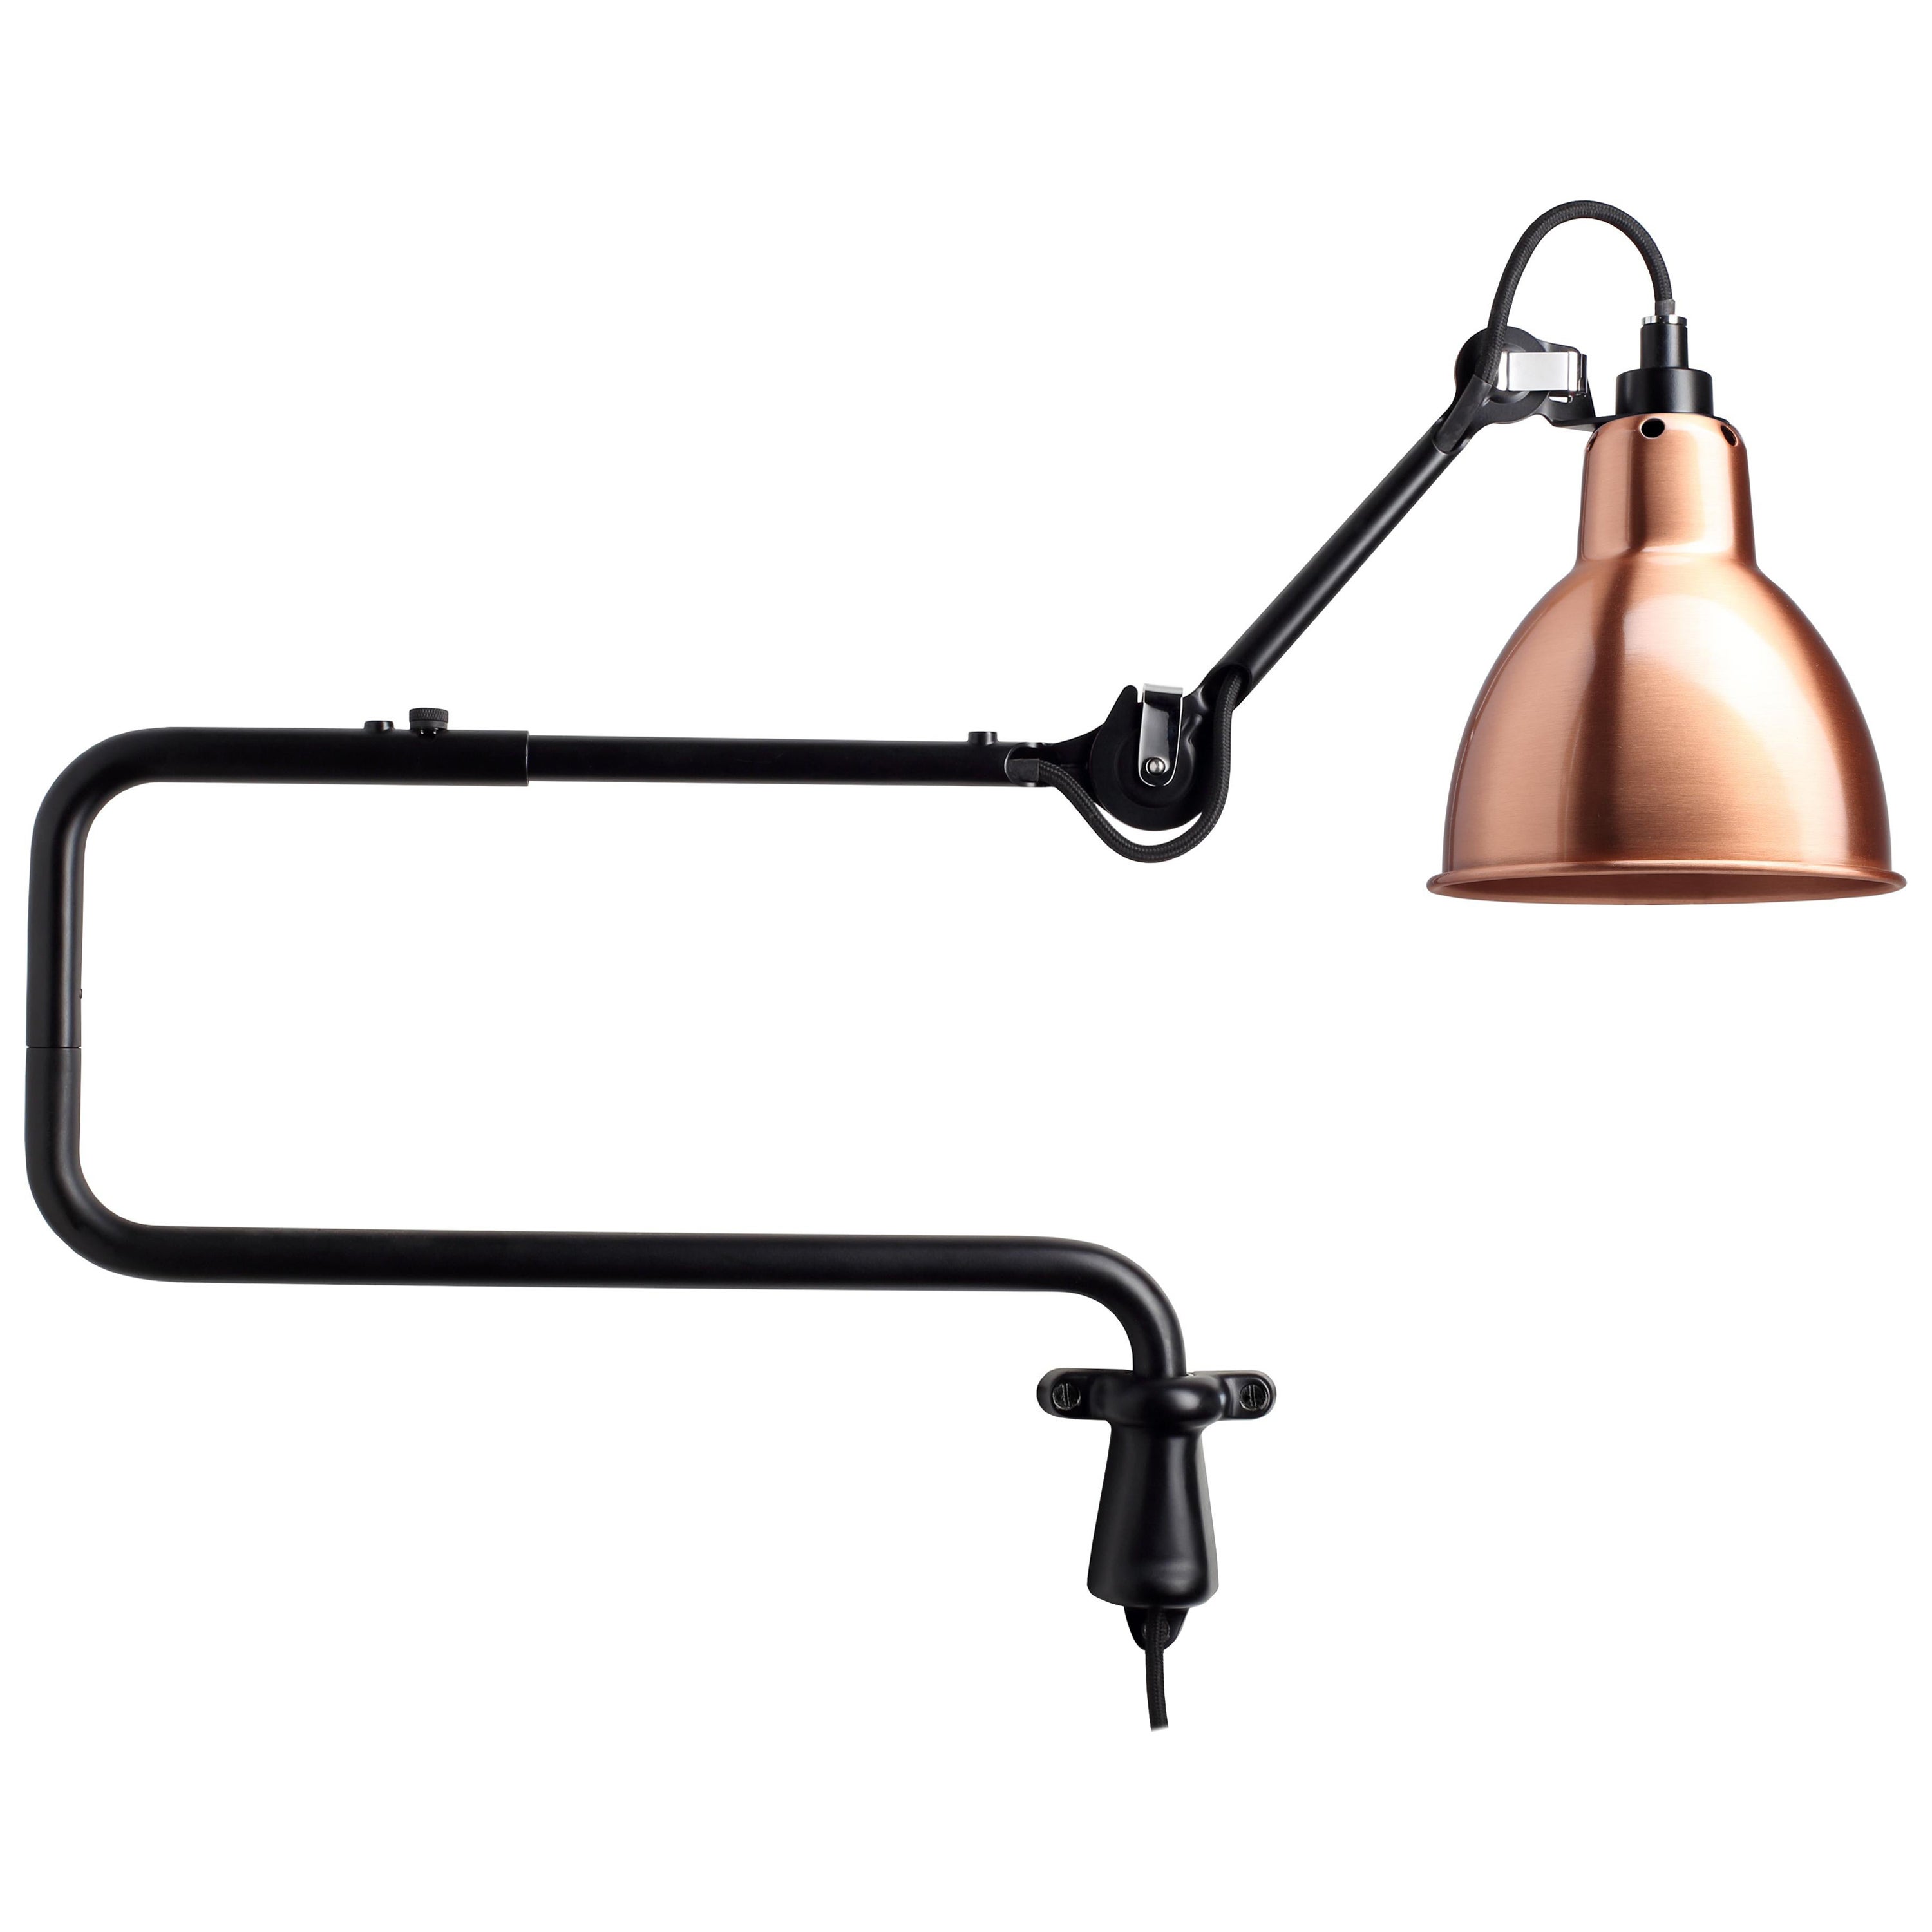 DCW Editions La Lampe Gras N°303 Wall Lamp in Black Arm and Copper Shade